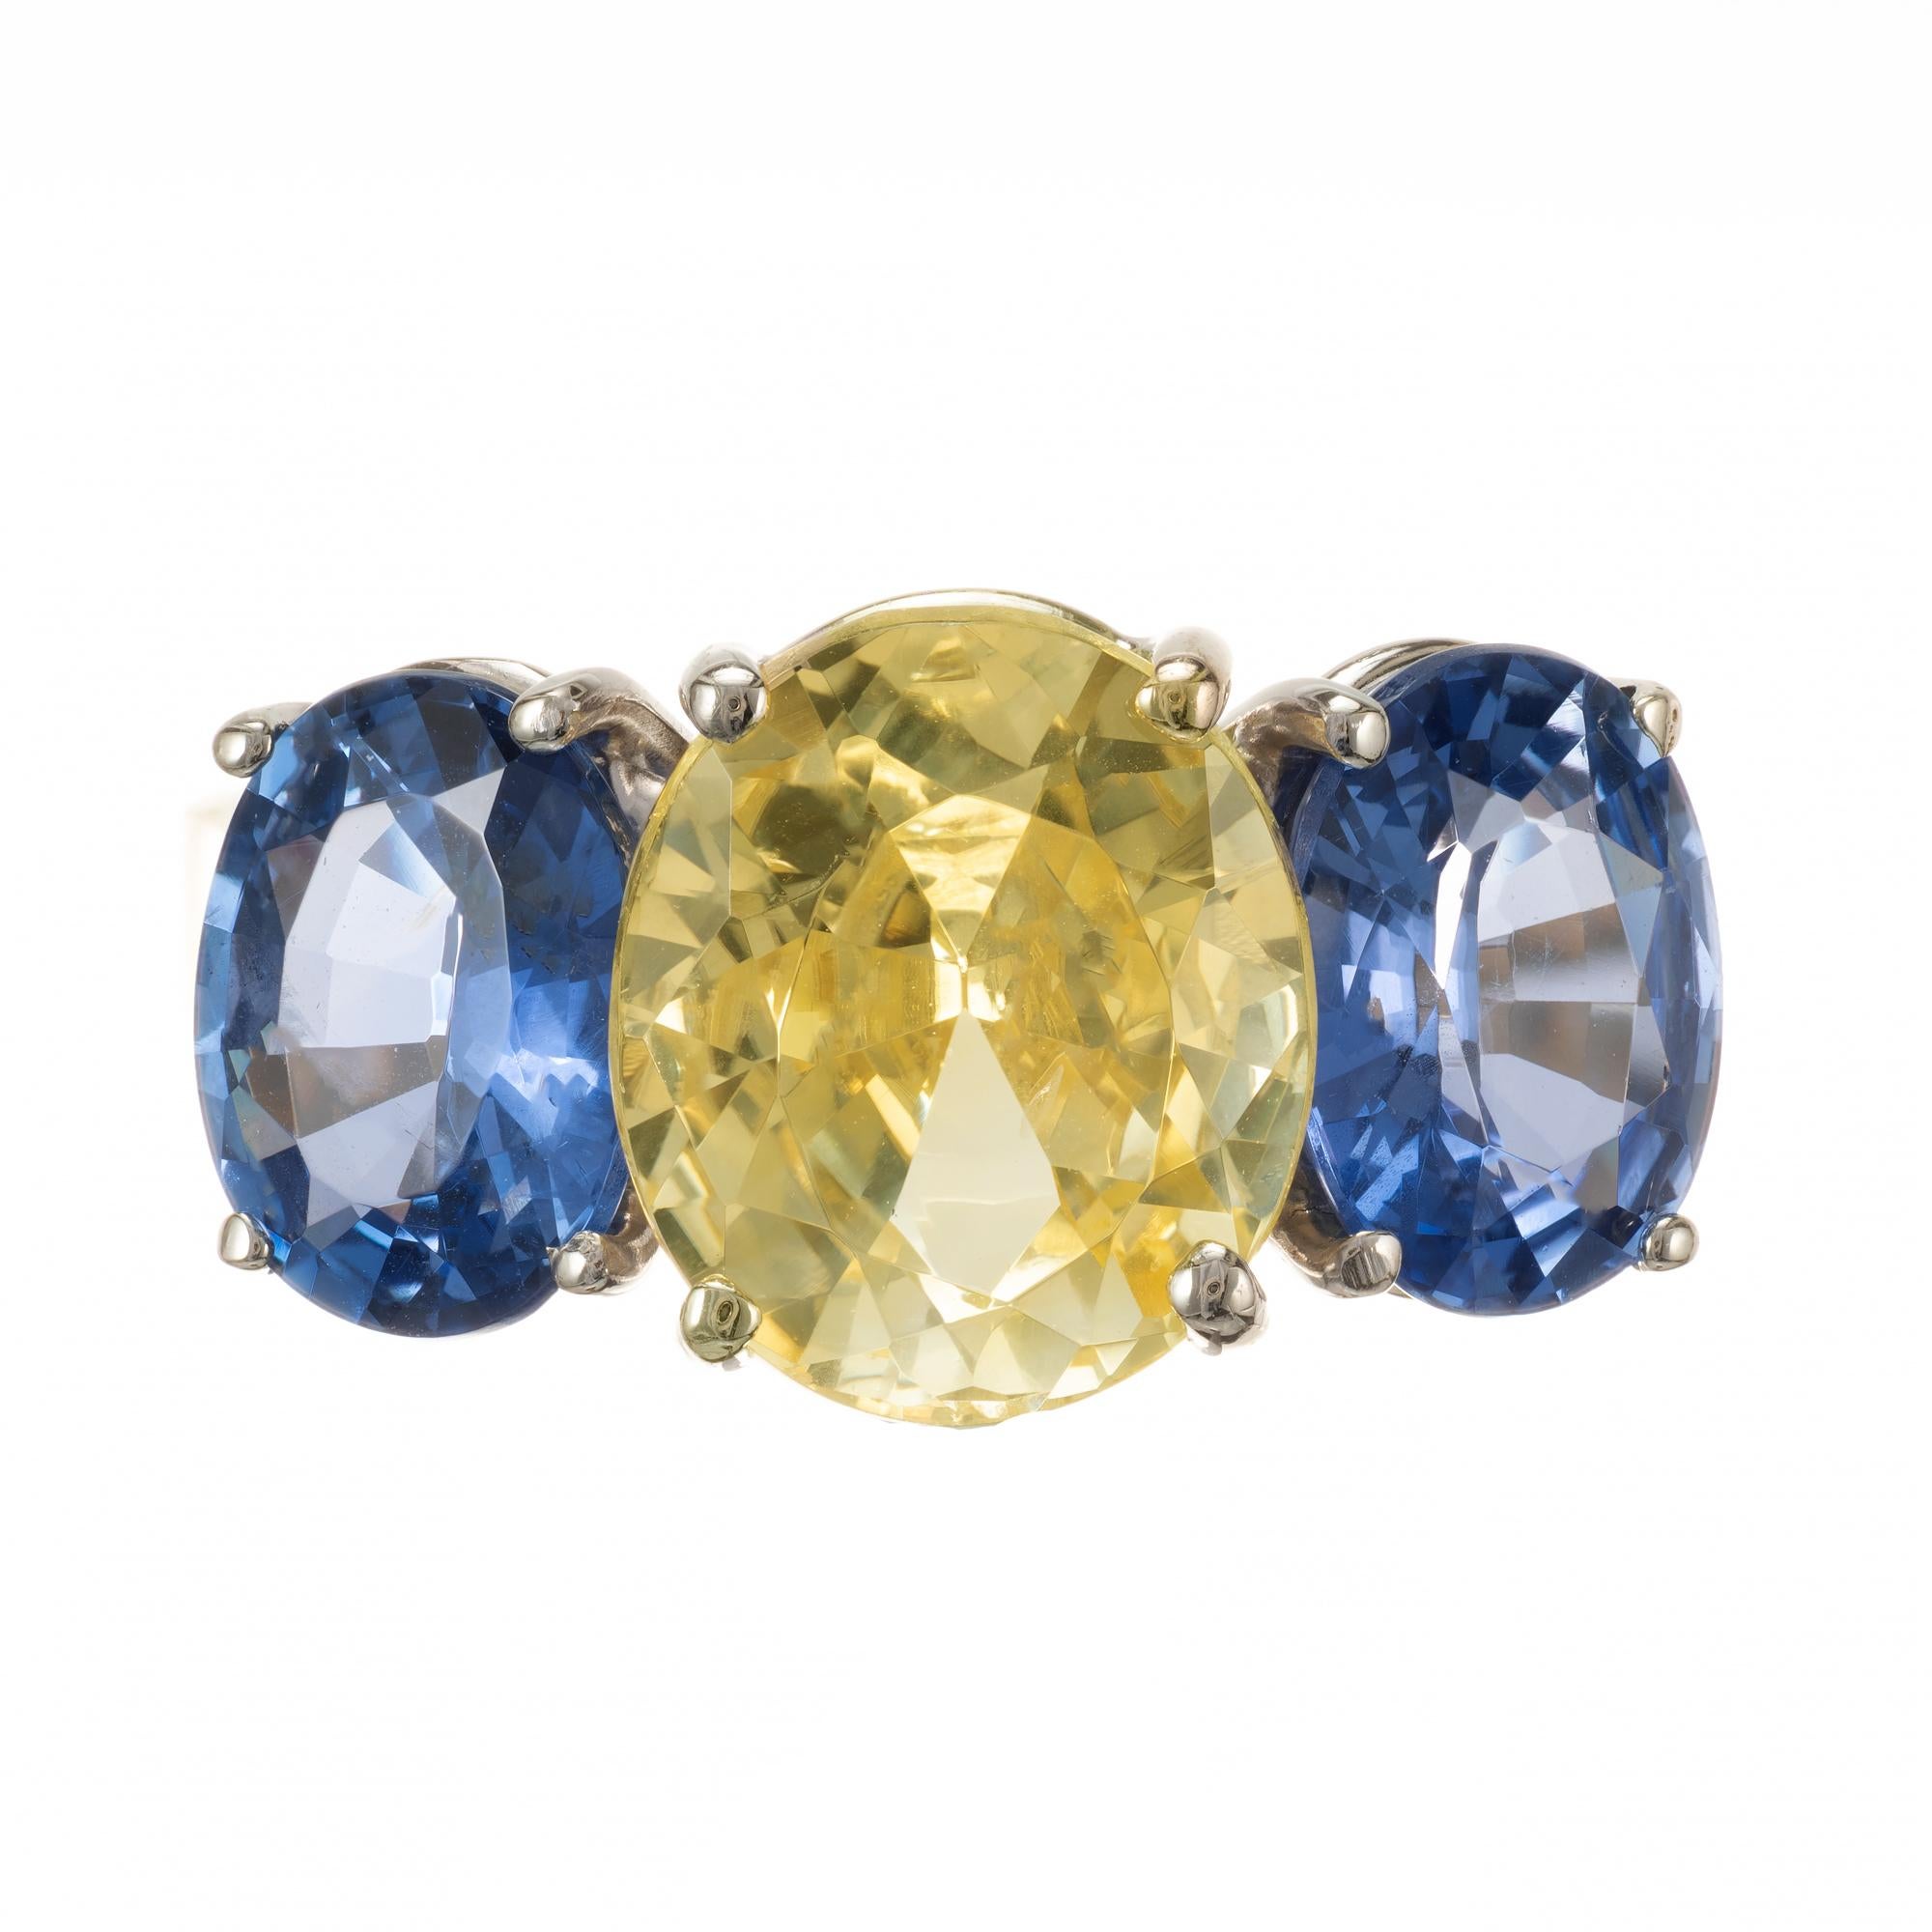 Oval Natural light lemon yellow Sapphire and blue sapphire three-stone engagement ring. The center stone is GIA certified with GIA certified blue sapphires on each side. Set in 18k yellow gold setting. 

1 oval natural fine bright soft lemon yellow